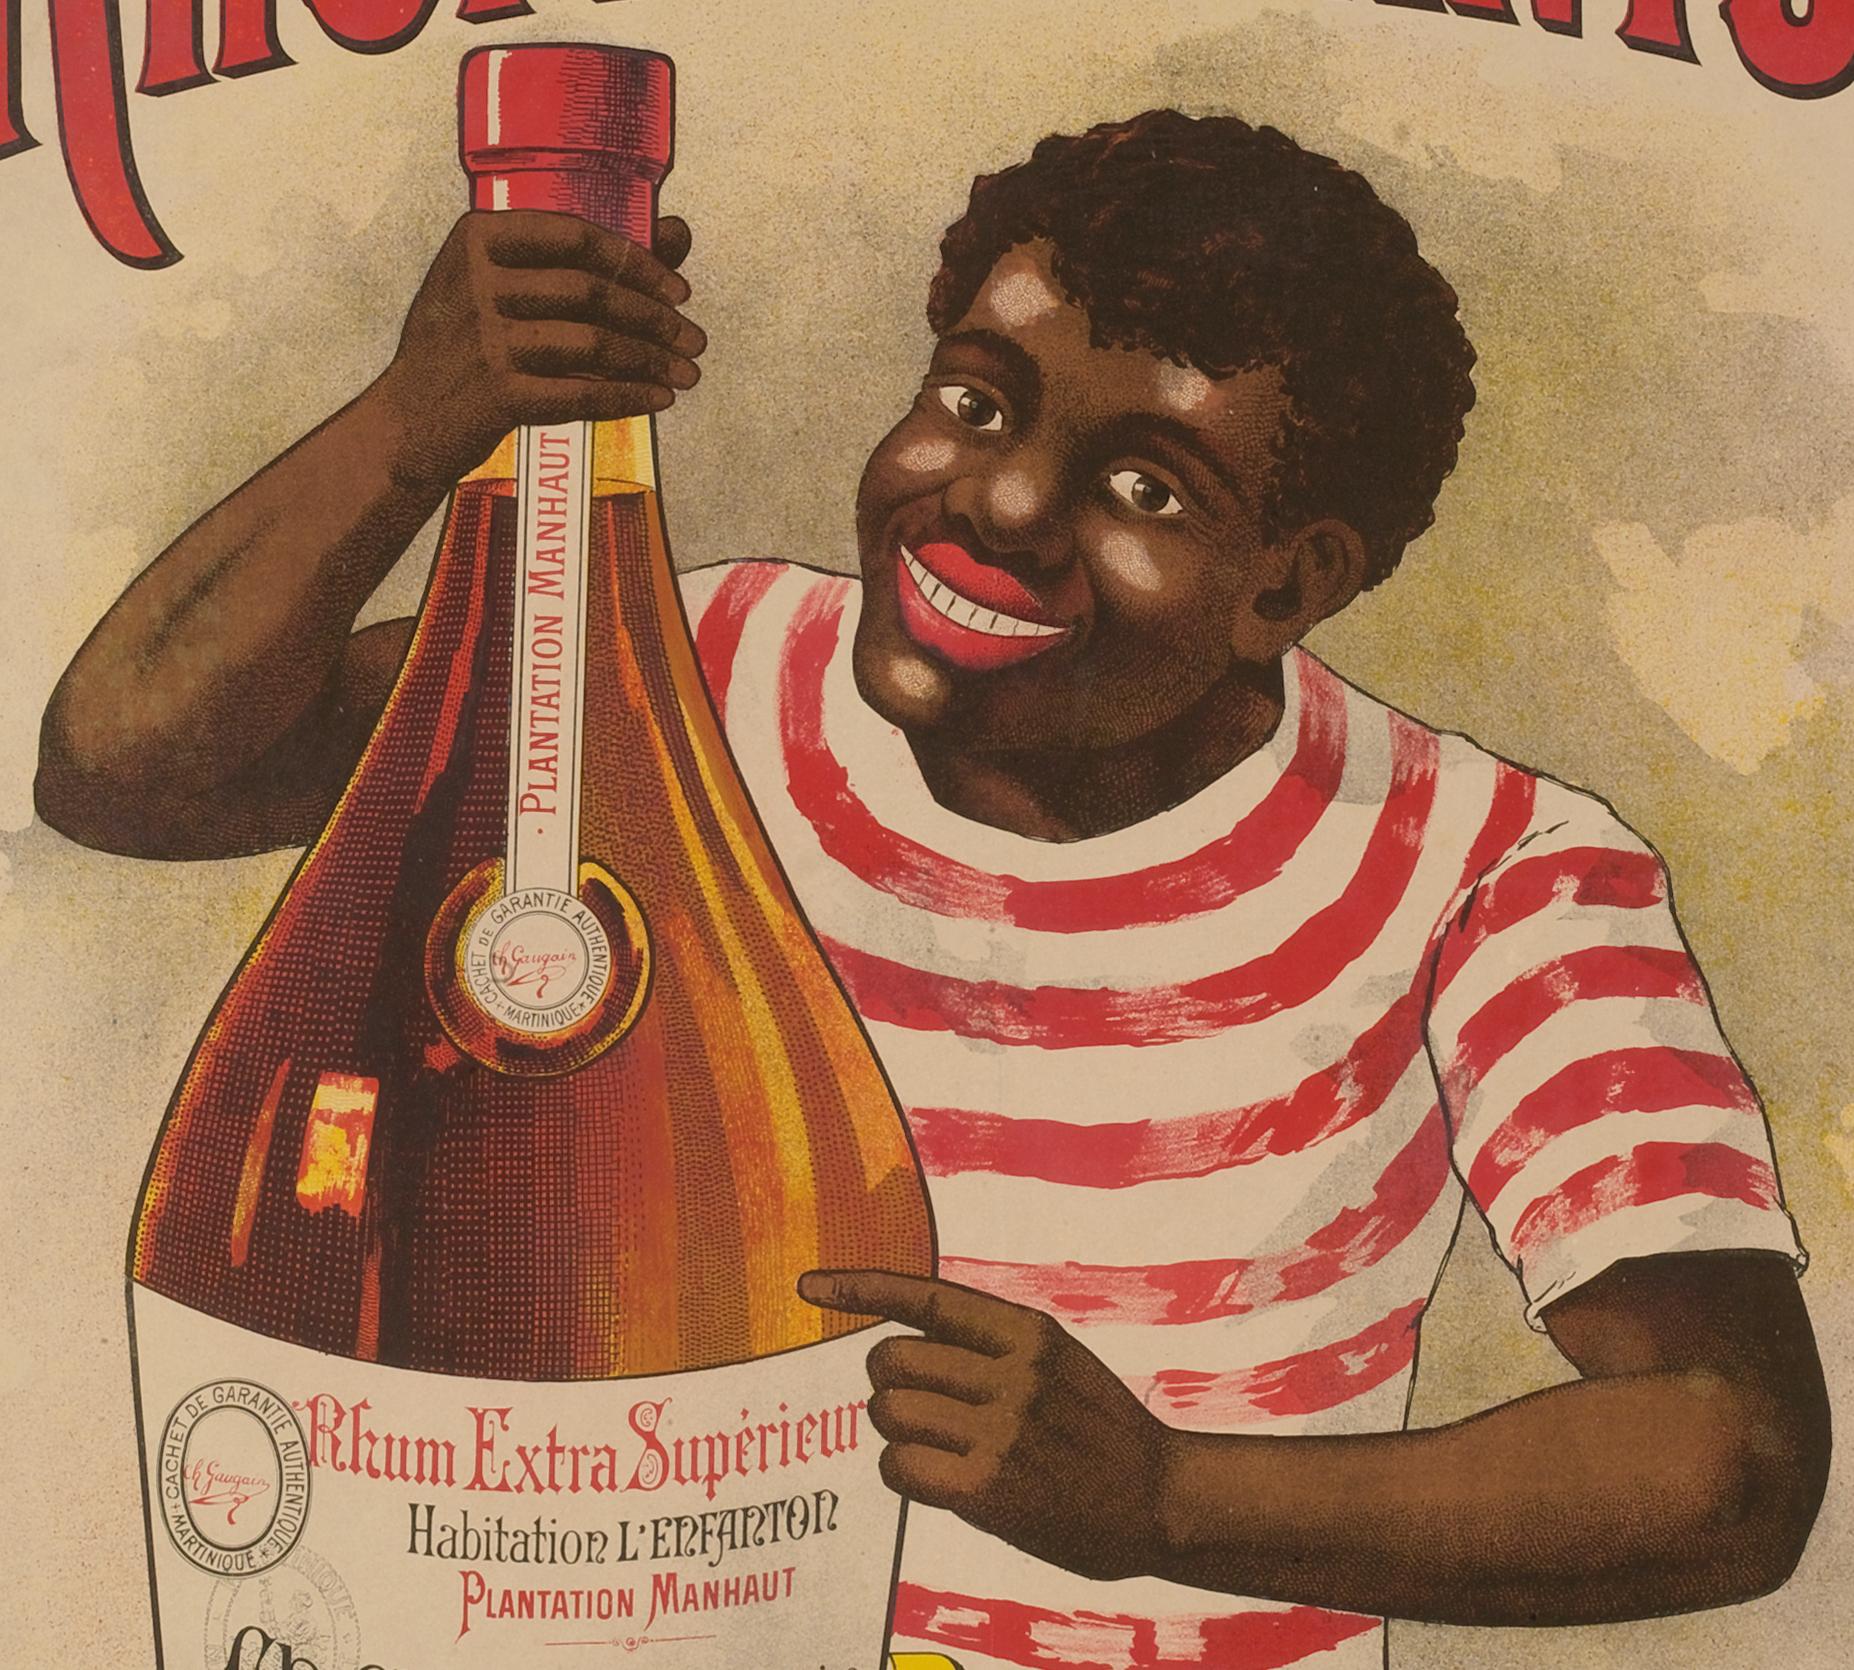 Original Vintage Poster-Rhum of Martinique-Antilles, 1900

The poster features a young black (African or Caribean boy) holding a bottle of rum in his hands.

Additional Details:

Materials and Techniques: Colour lithograph on paper

Size (w x h):